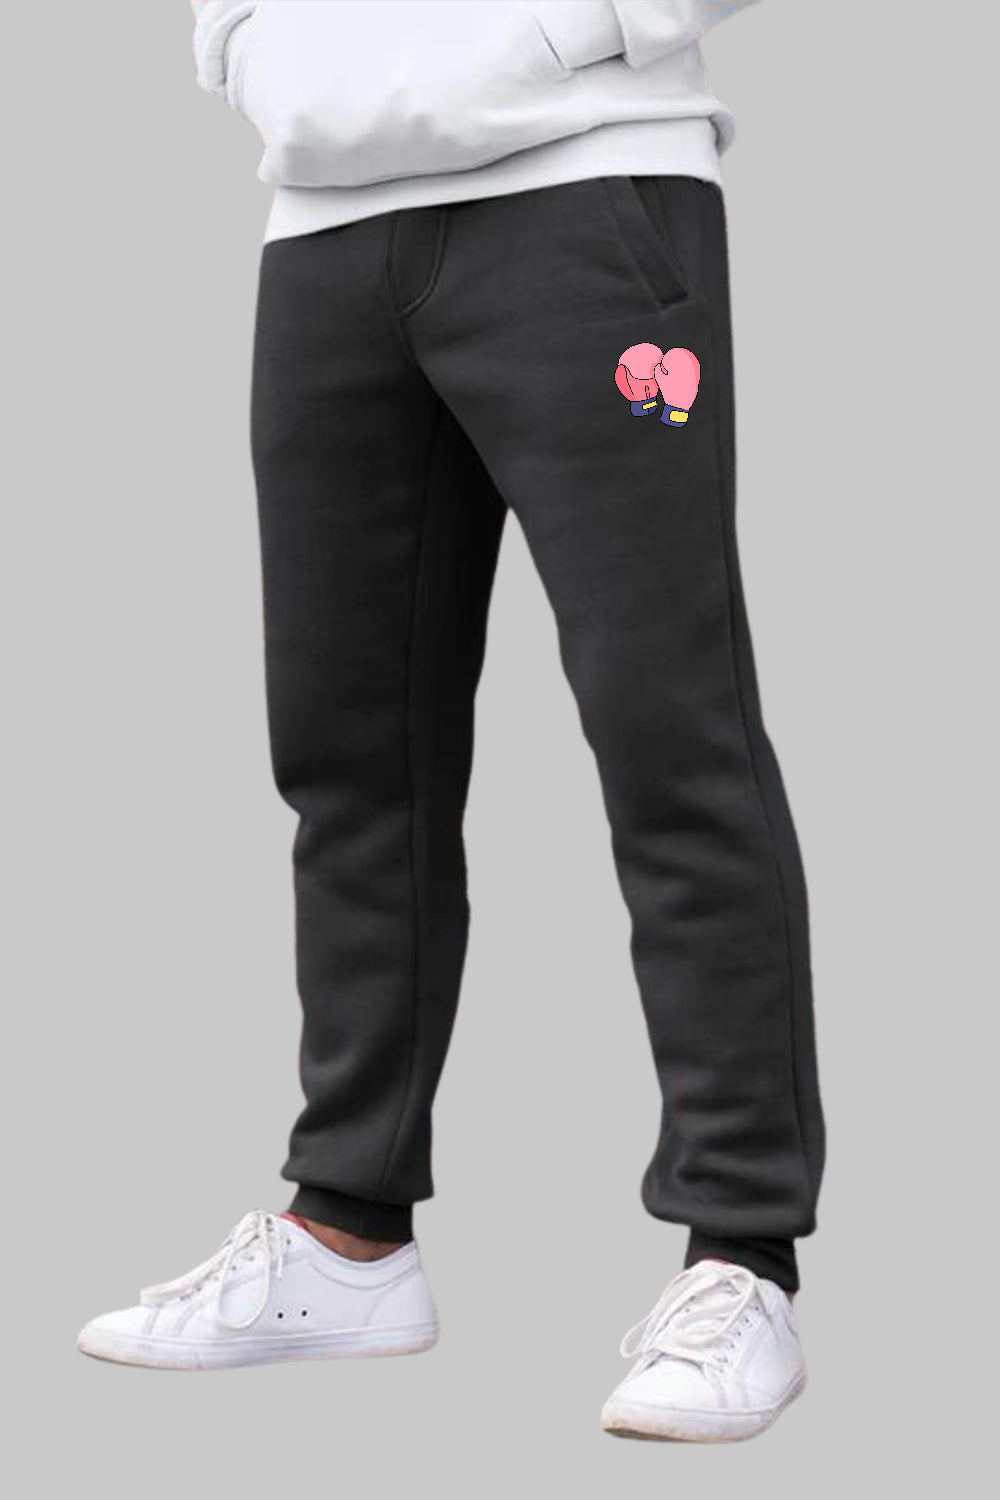 Boxing Graphic Printed Black Joggers